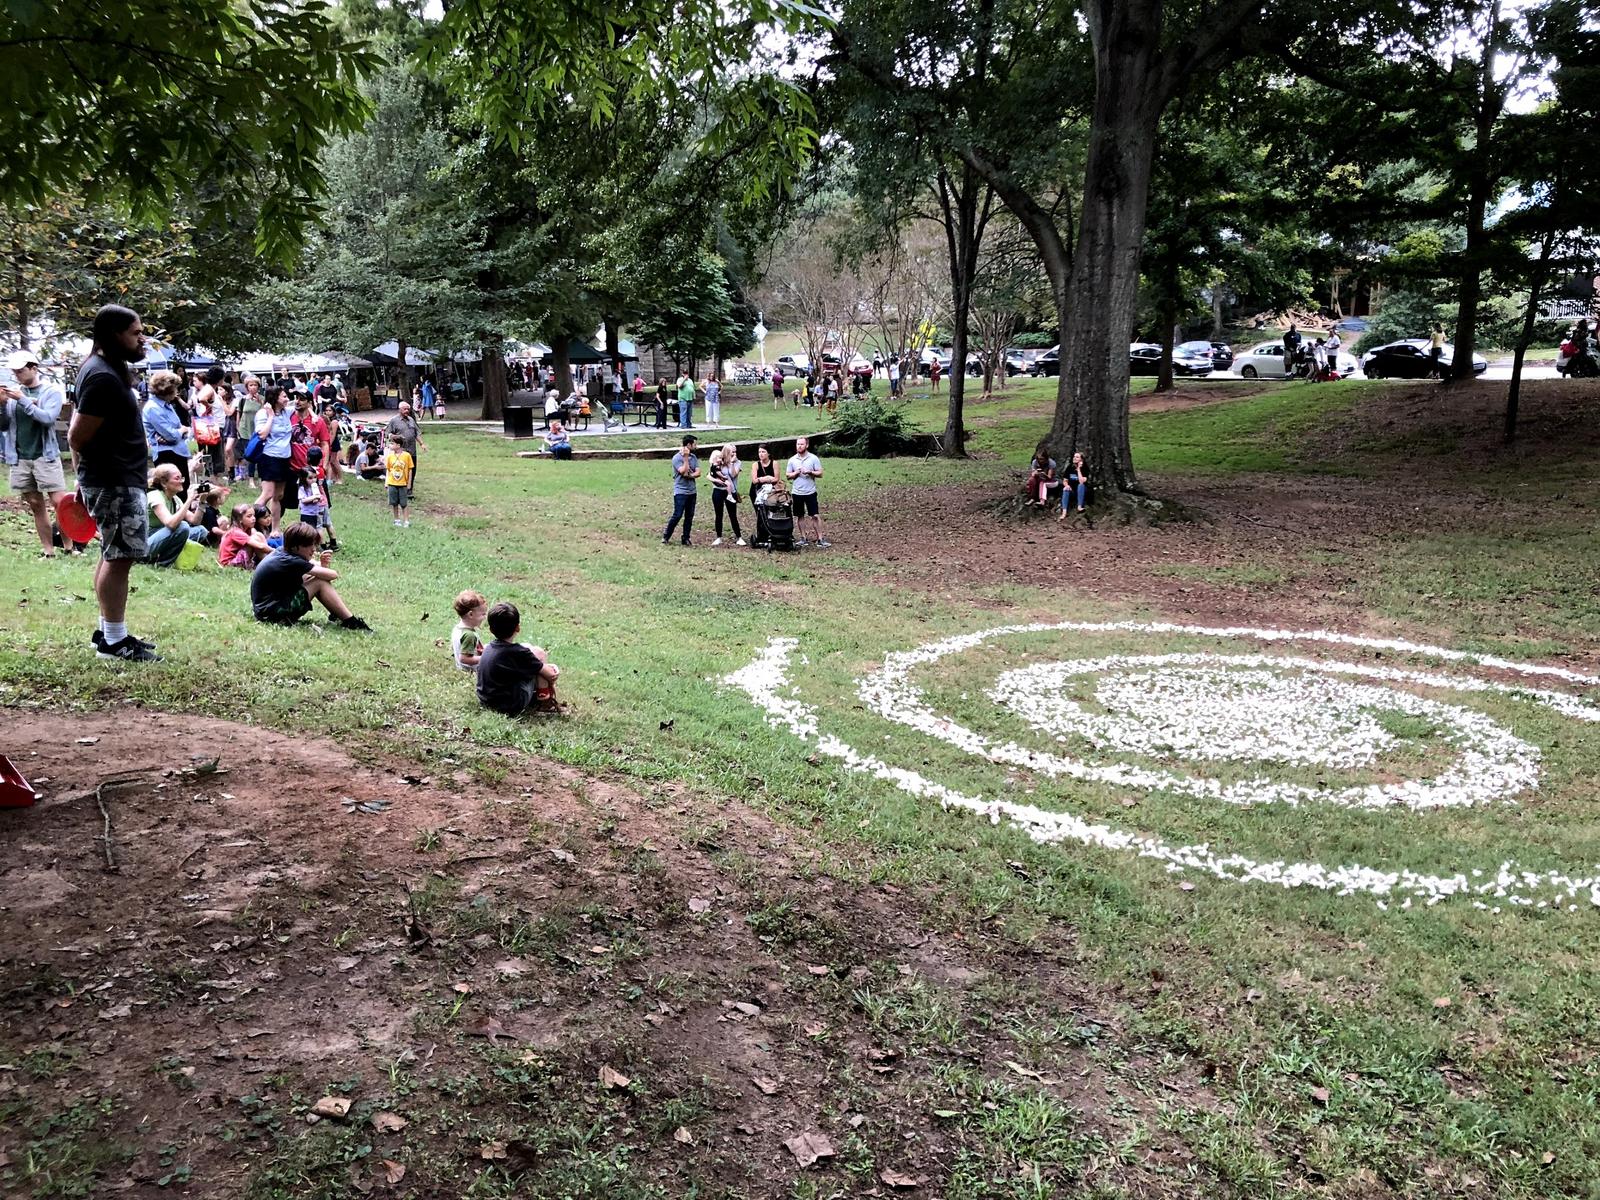 One of five durational installations created by Unexpected Collective in Grant Park: a crowd looks on as a large galaxy spiral of starch peanuts dissolves into a grass field.